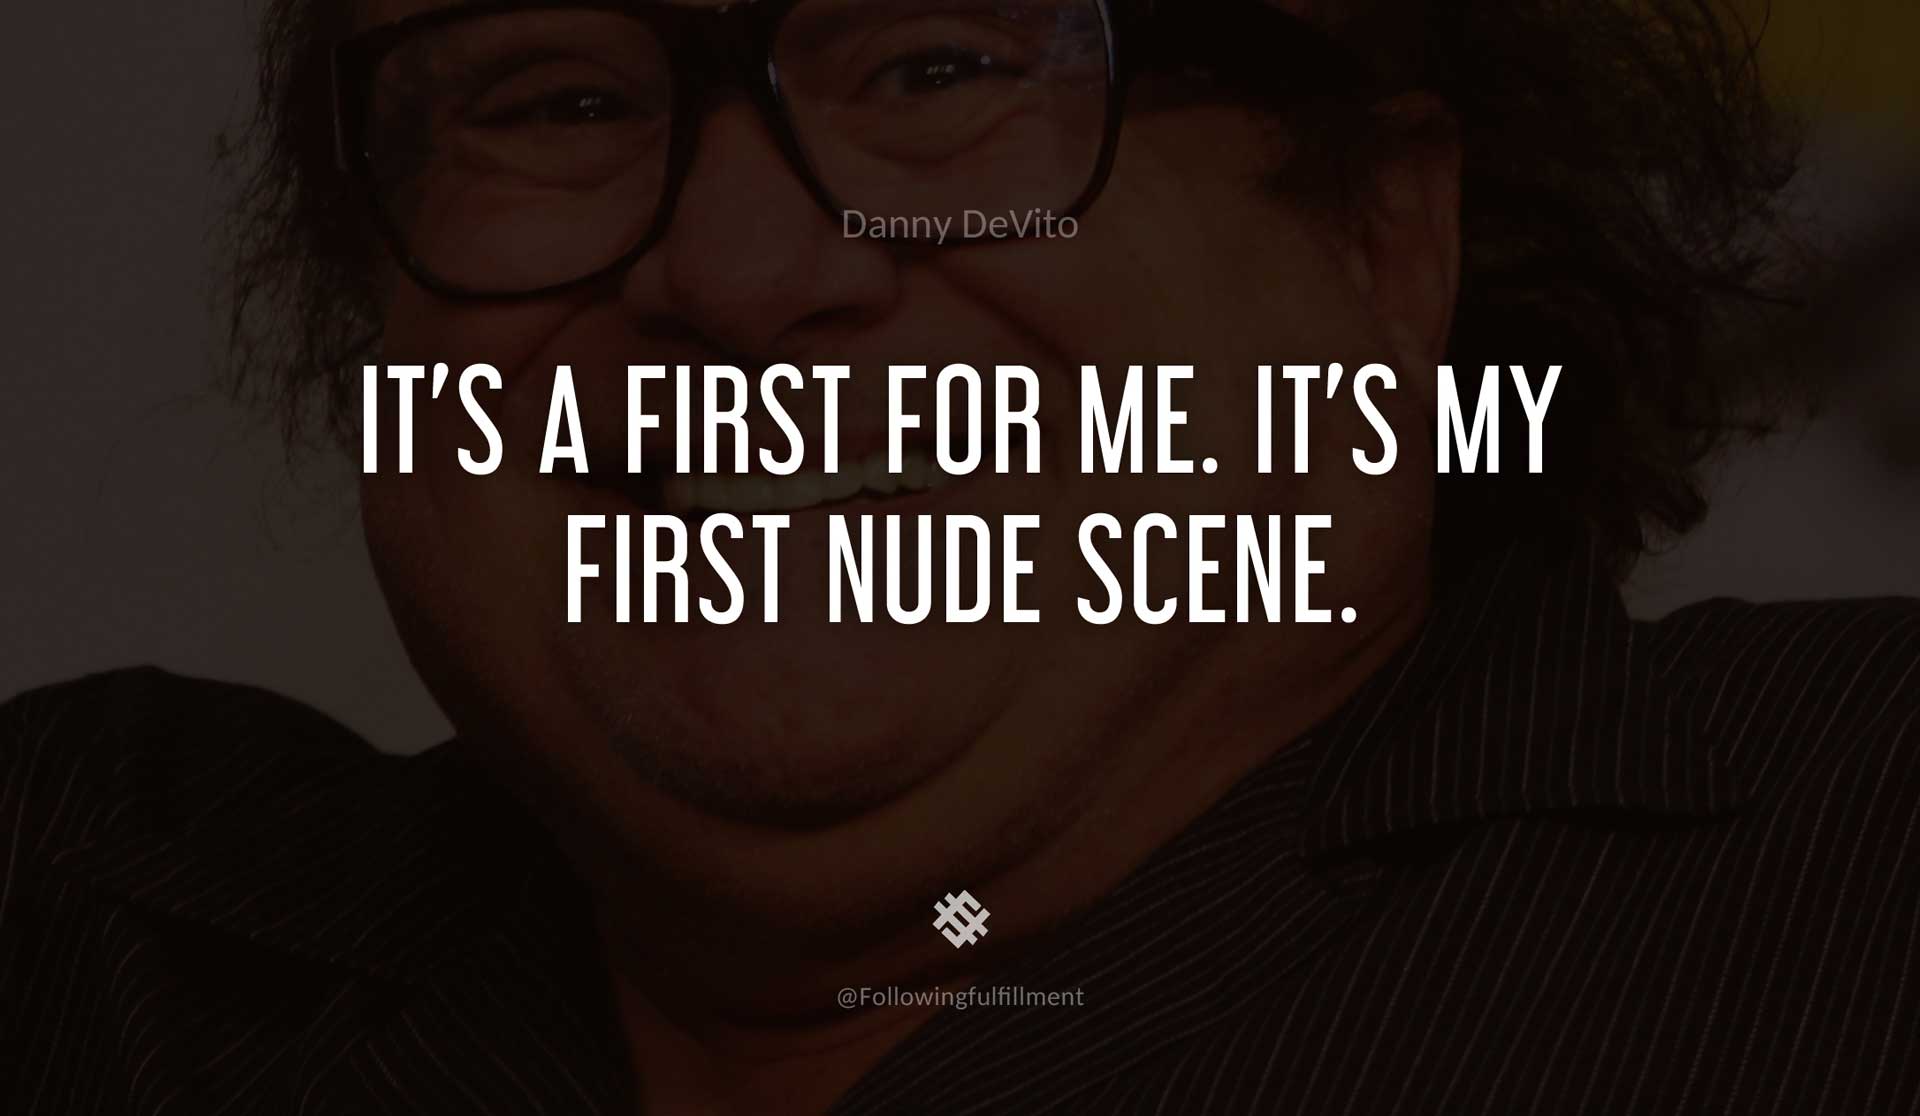 It's-a-first-for-me.-It's-my-first-nude-scene.-DANNY-DEVITO-Quote.jpg